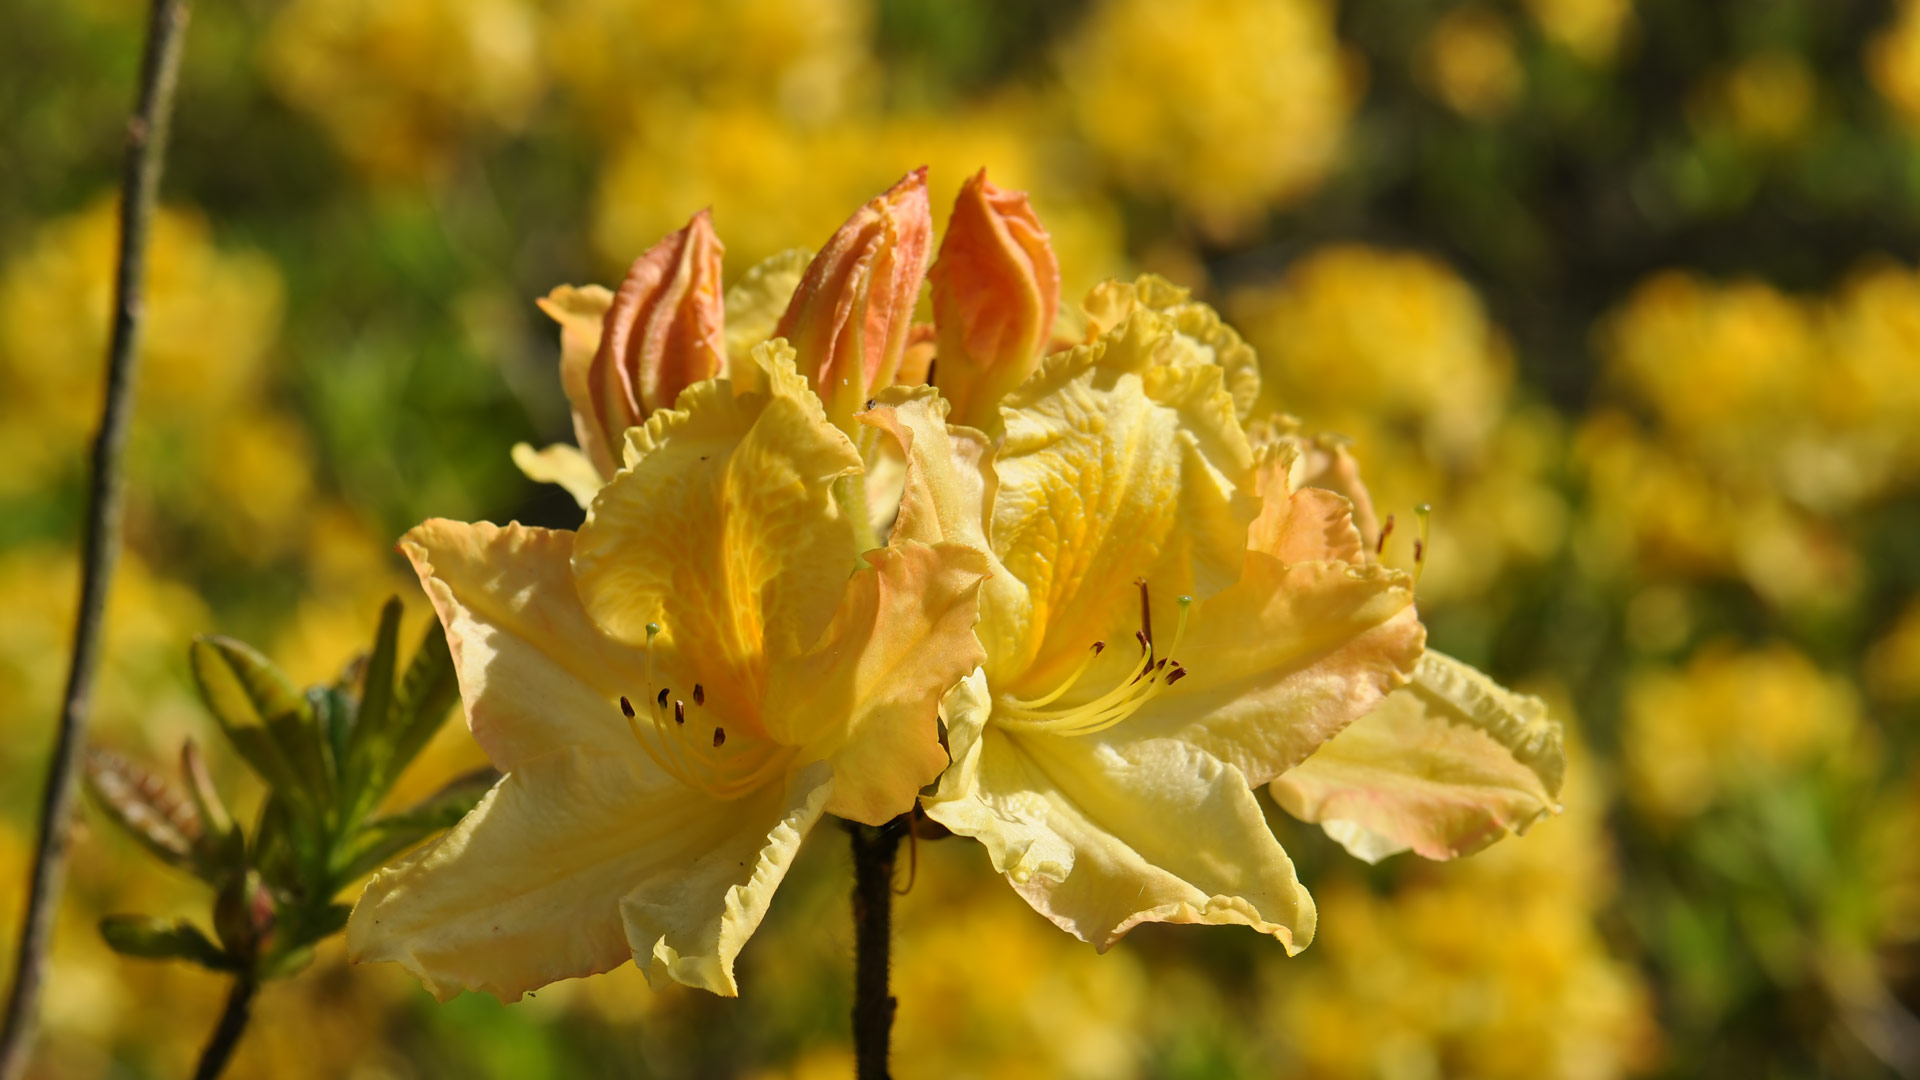 Rhododendron (2)